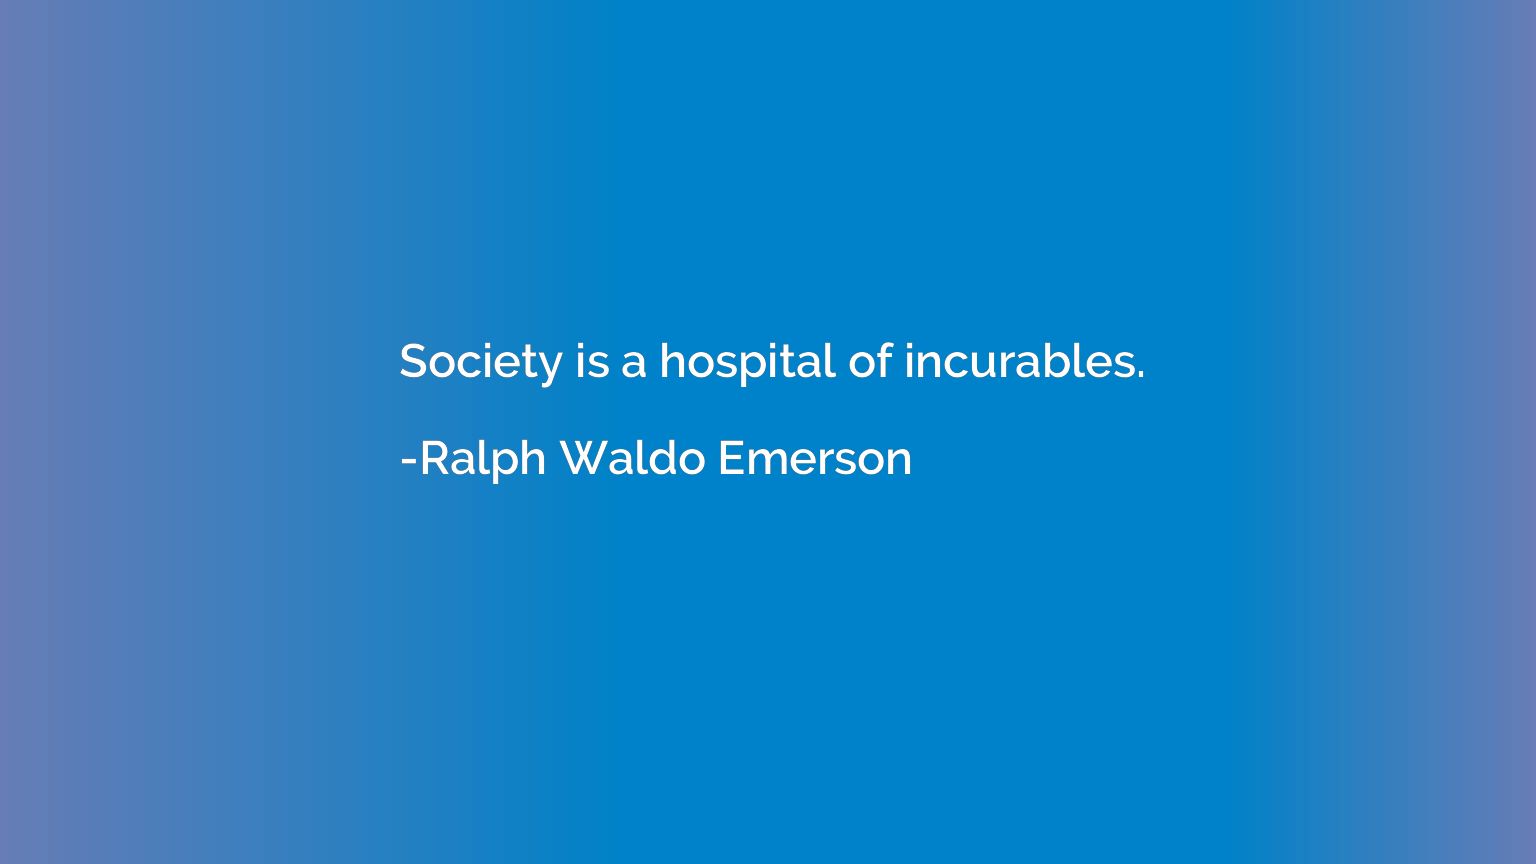 Society is a hospital of incurables.